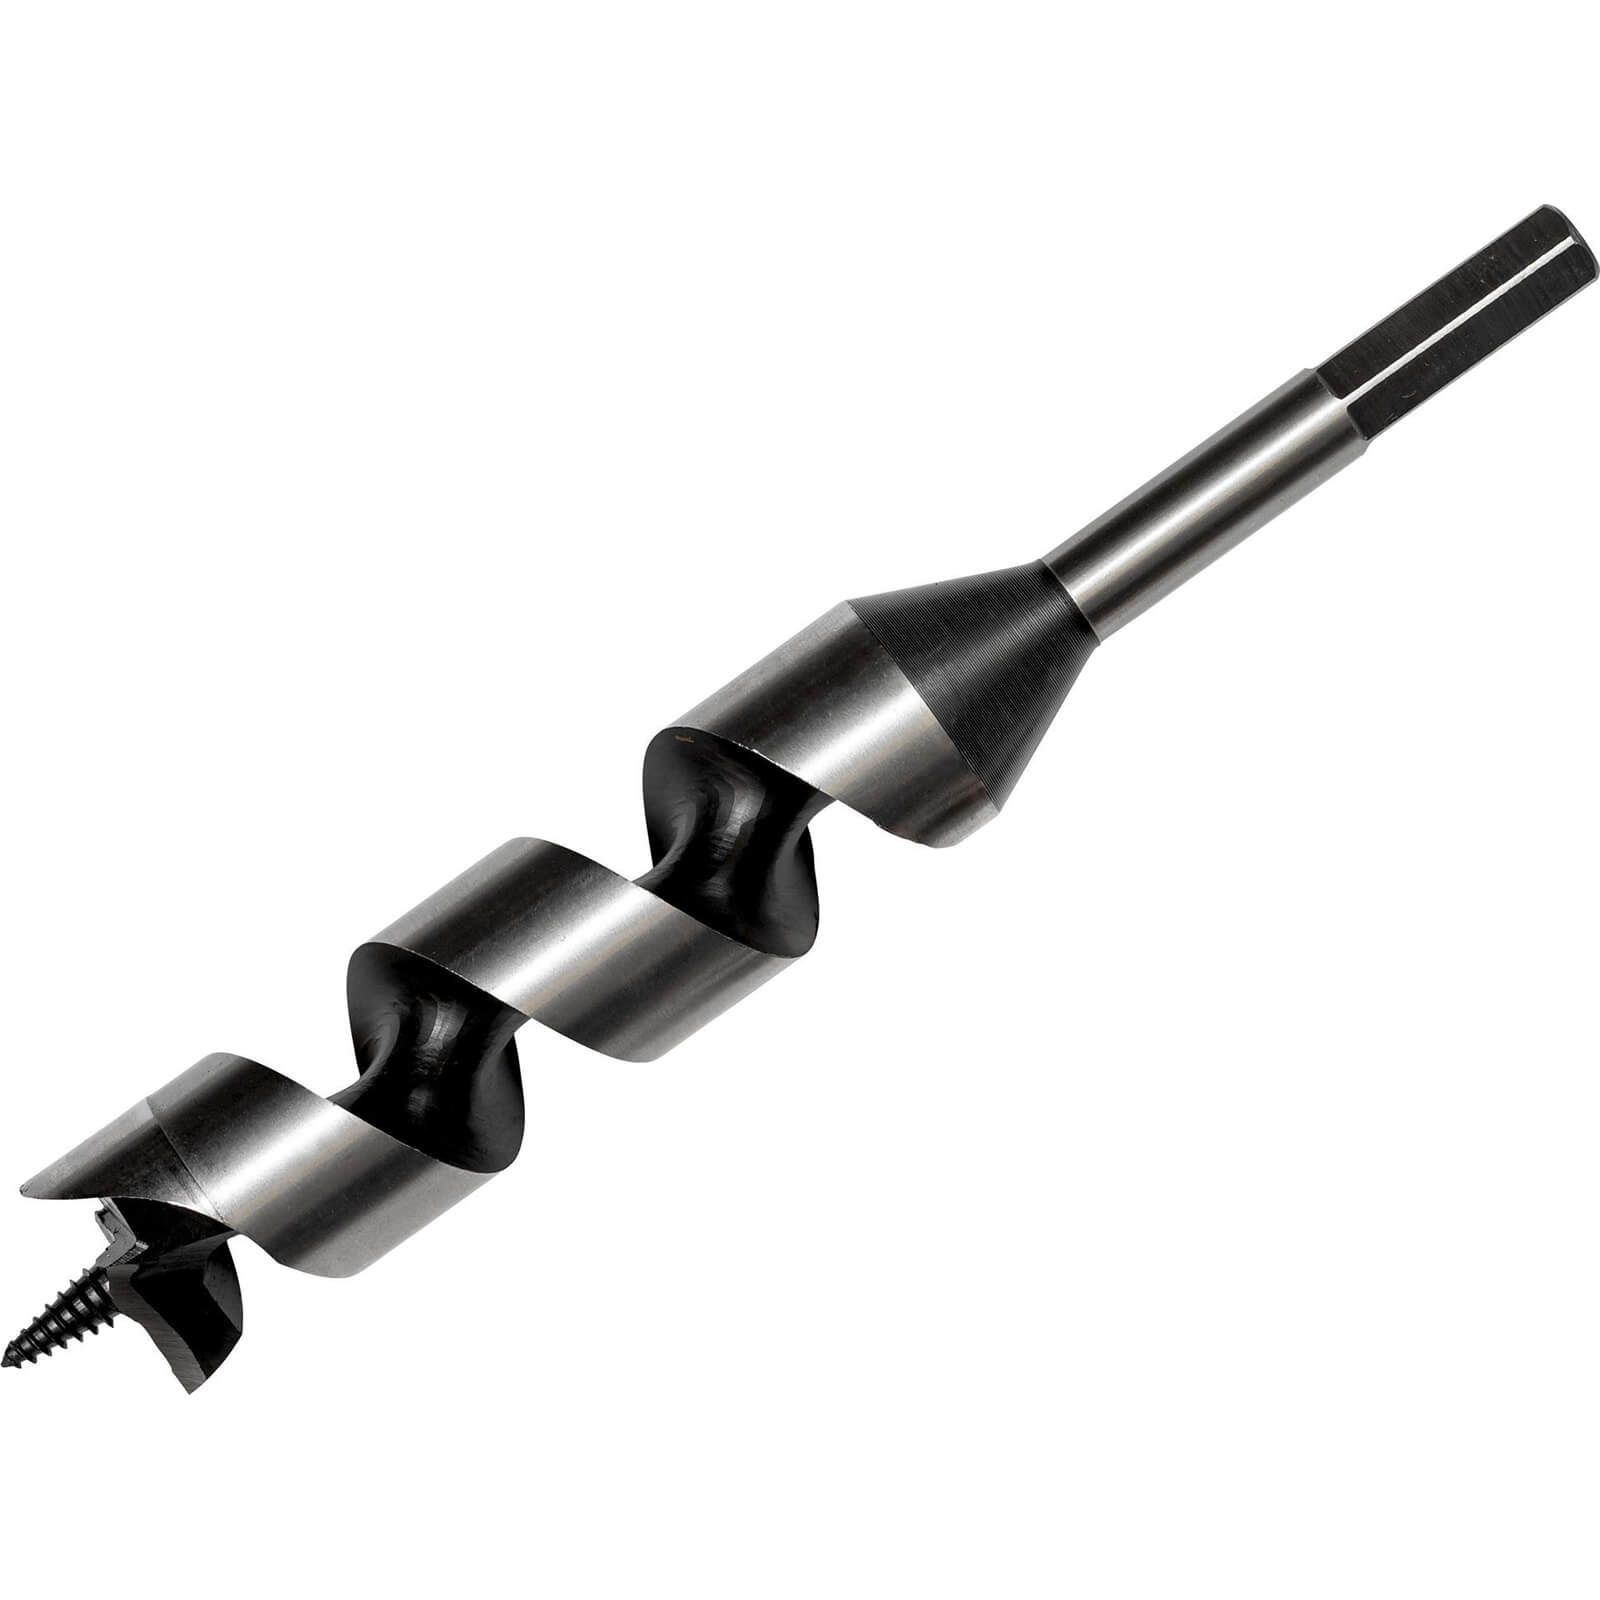 Photo of Bahco 9626 Series Combination Auger Drill Bit 32mm 230mm